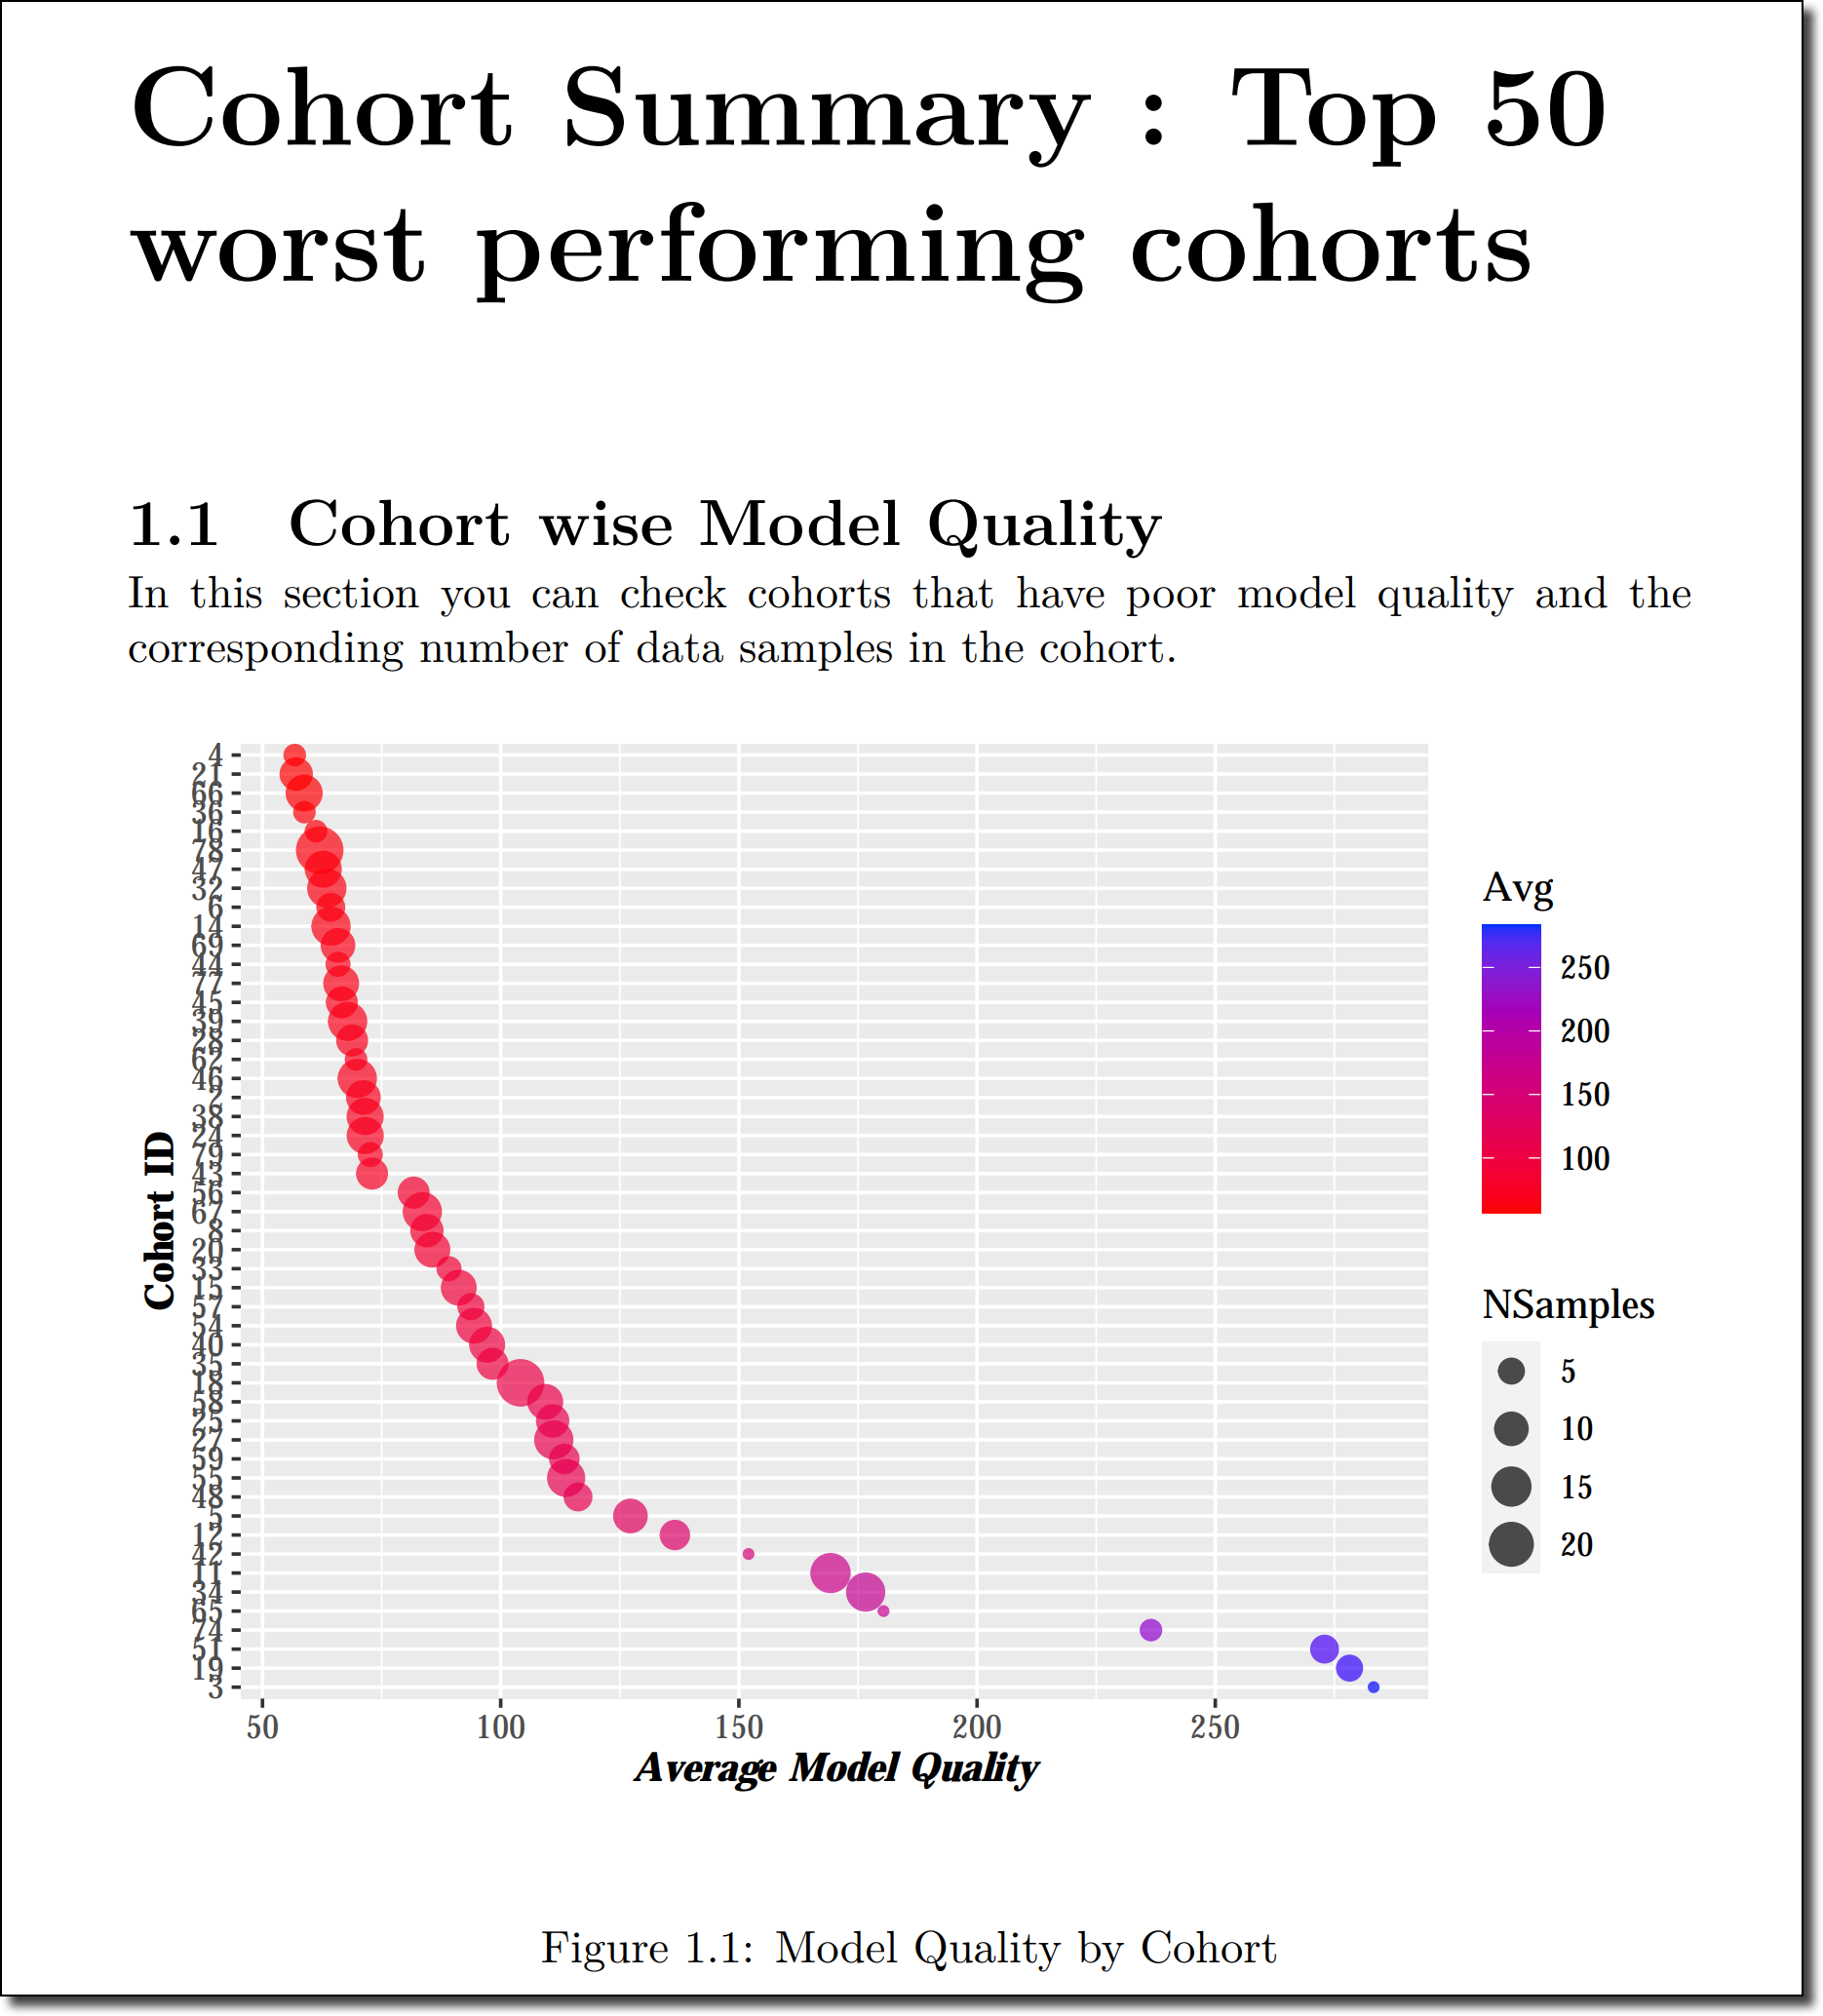 The cohort summary shows the top 50 worst performing cohorts.